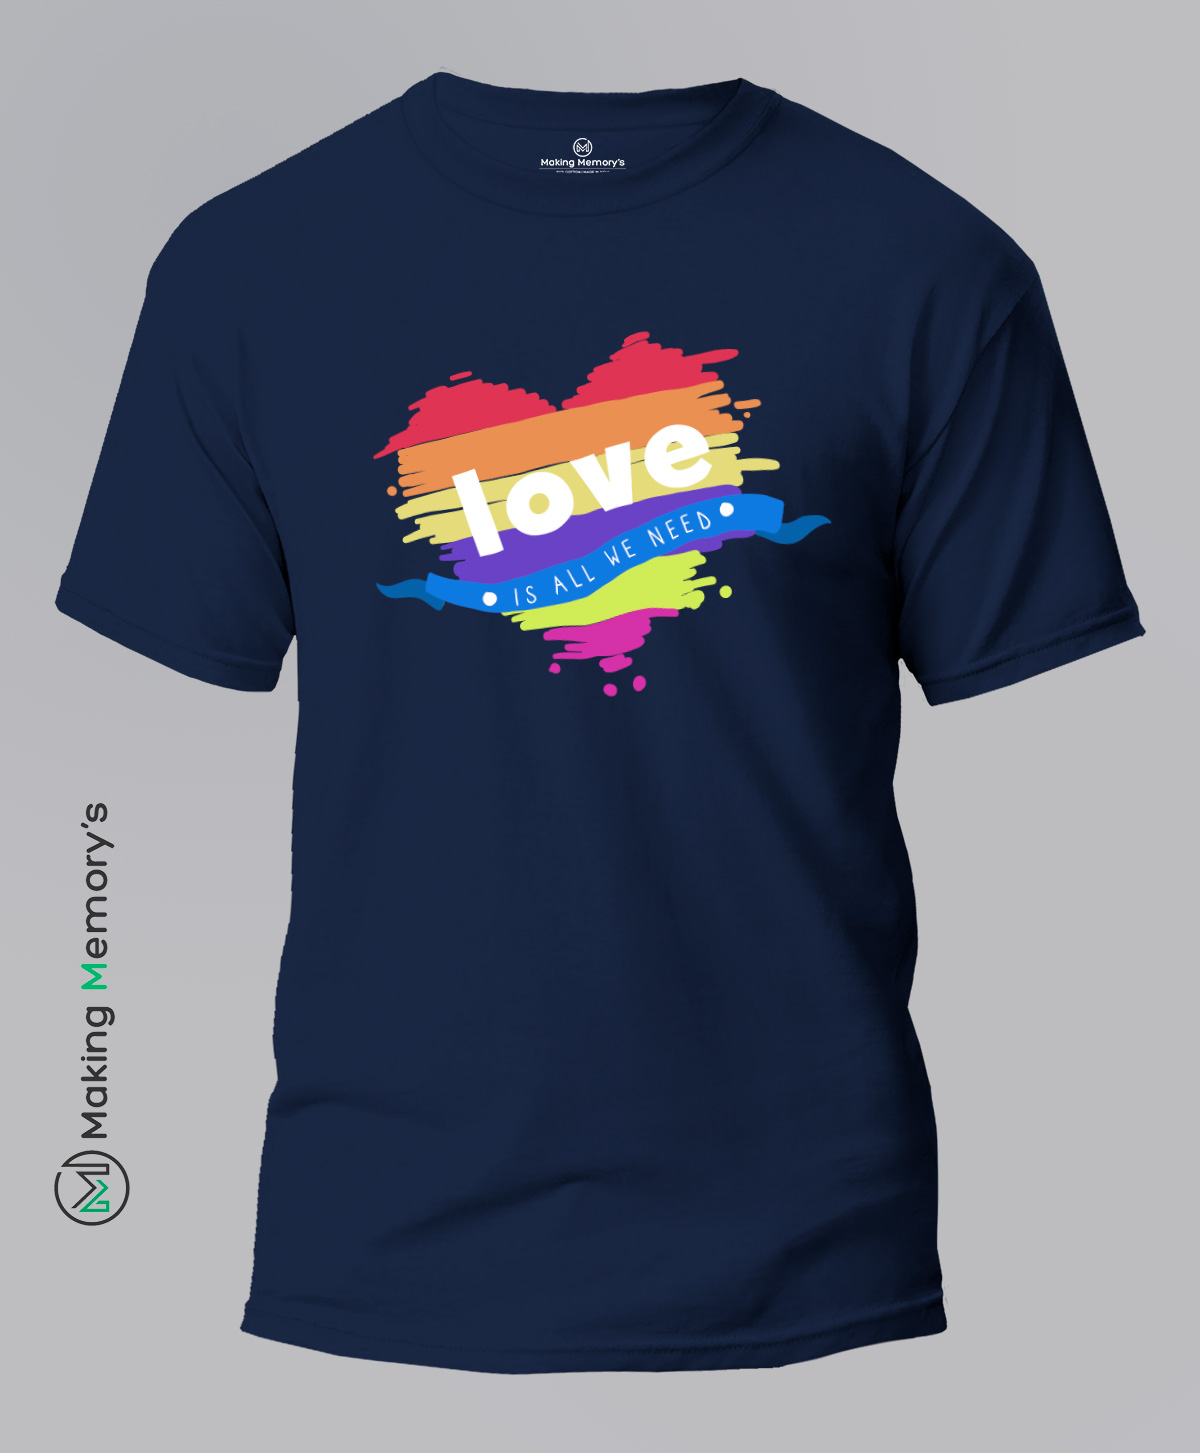 Love-Is-All-We-Need-Blue-T-Shirt